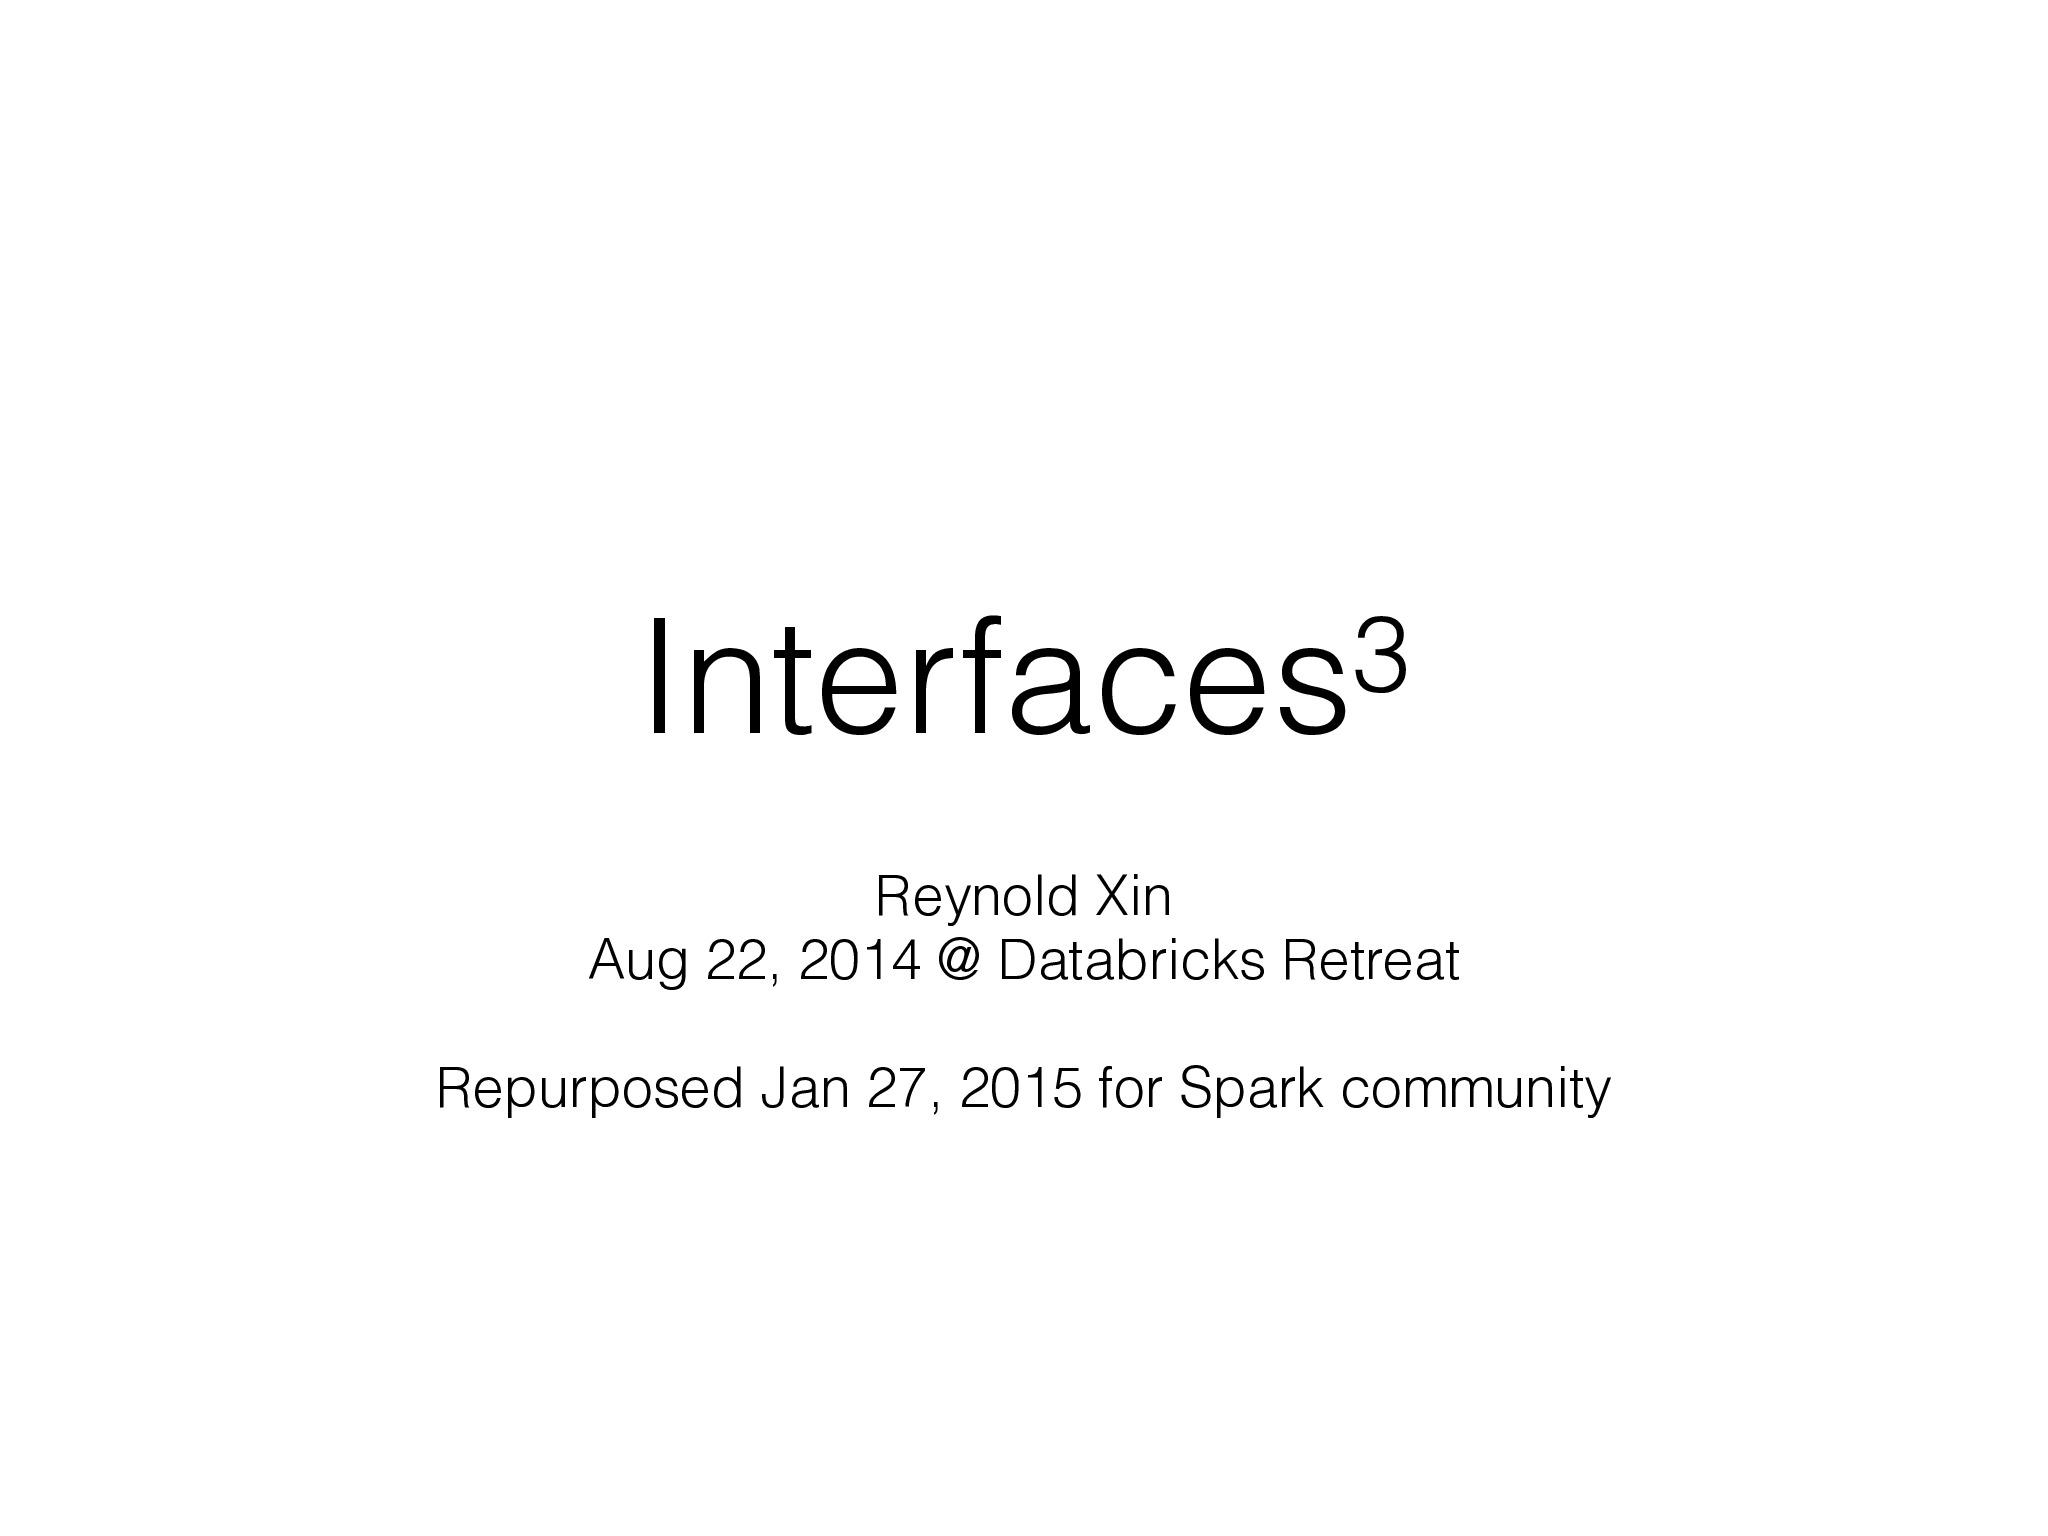 Interface Design for Spark Community by Reynold Xin